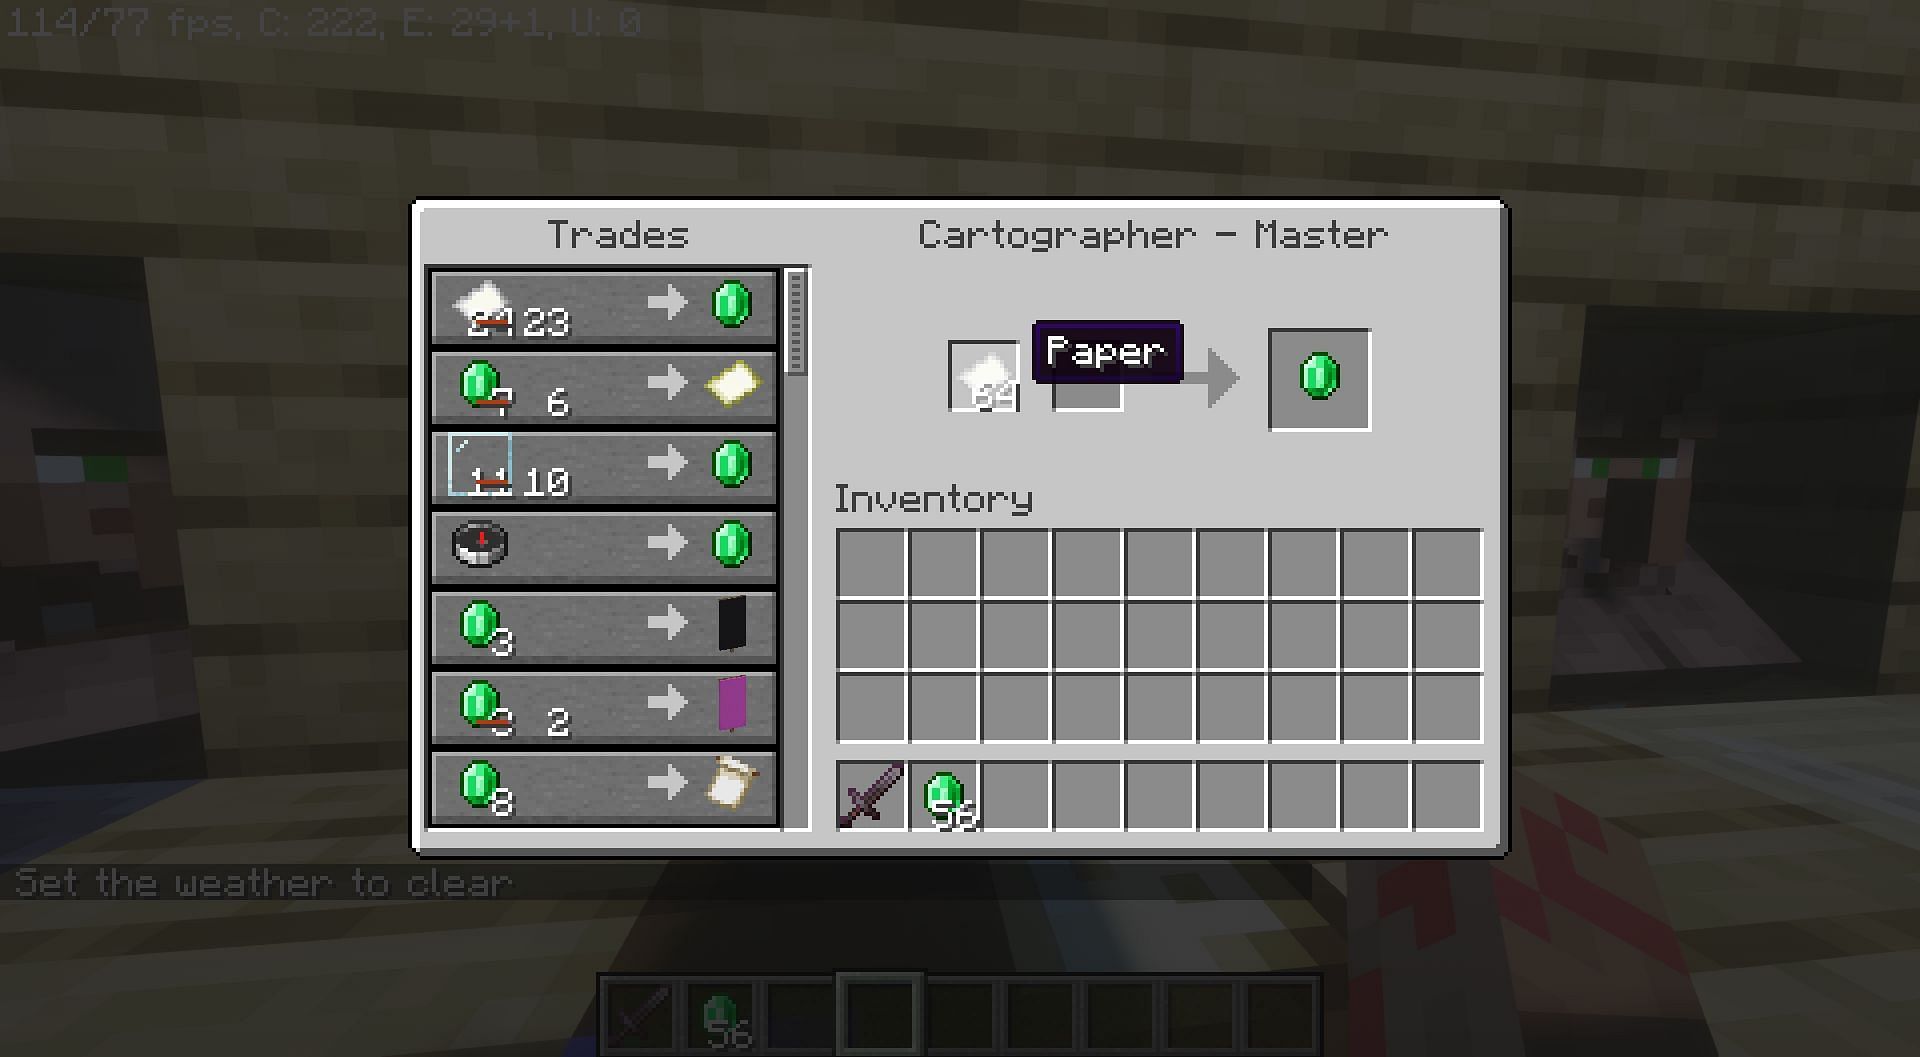 Paper being traded with cartographer (Image via Minecraft)